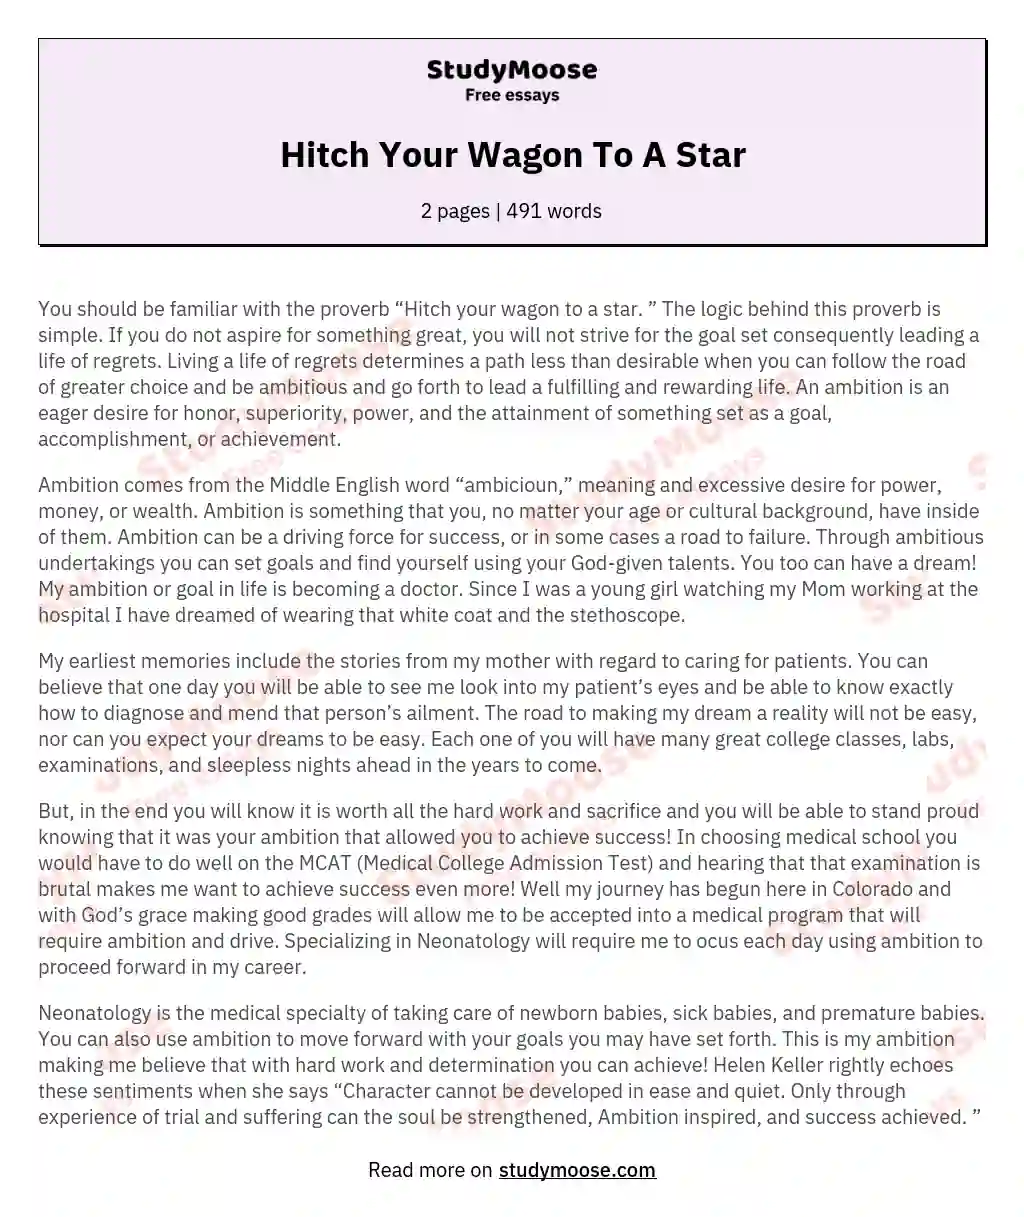 Hitch Your Wagon To A Star essay